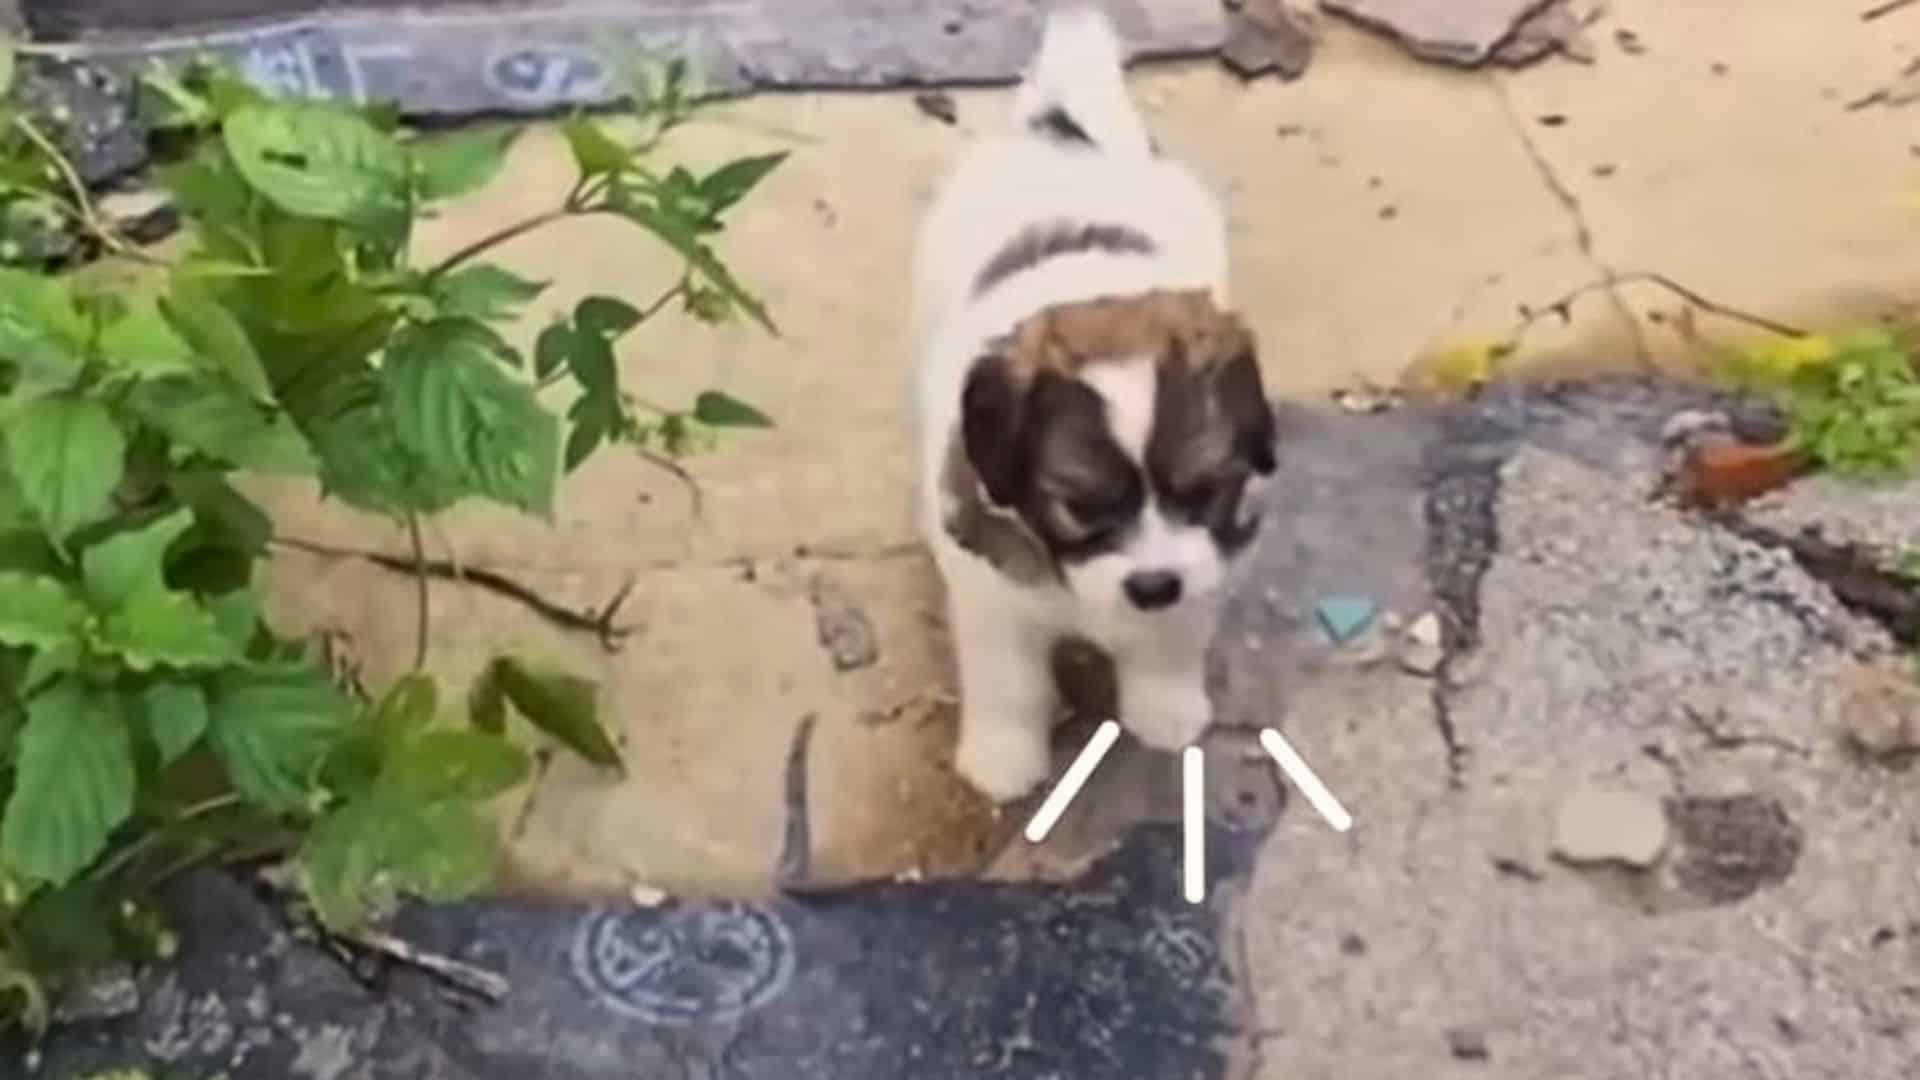 Rescuers Follow A Tiny Pup Begging For Help, Only To Discover Another Shocking Surprise